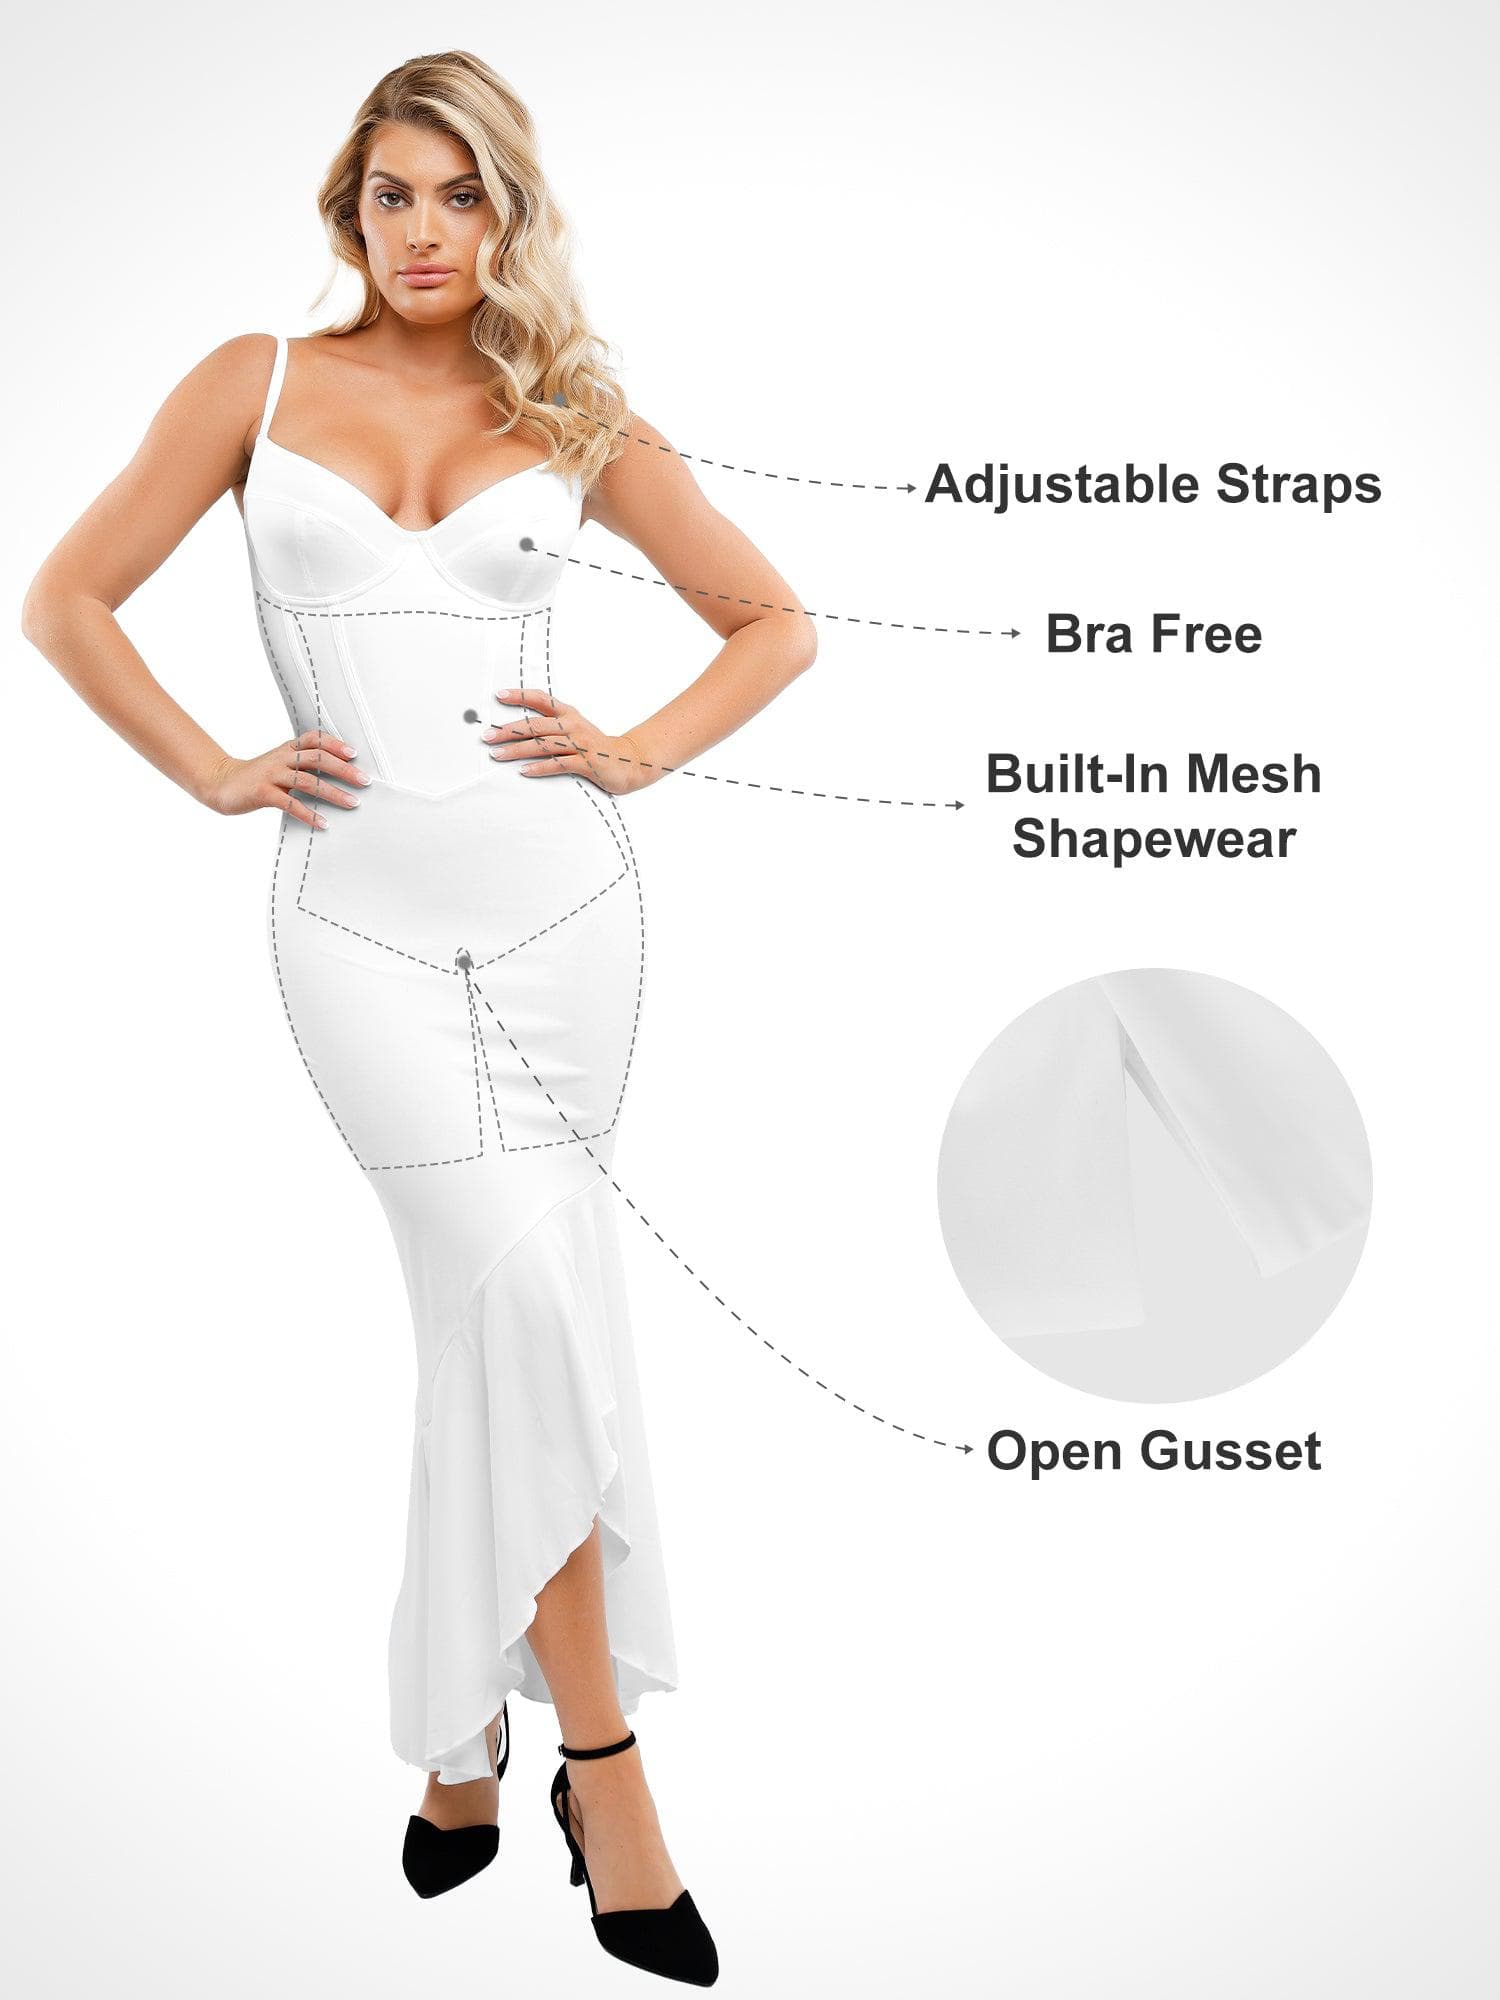 Popilush Formal Bodycon Party Summer Dress Built-in Shapewear Corset Style Maxi Dress Or Thong Bodysuit